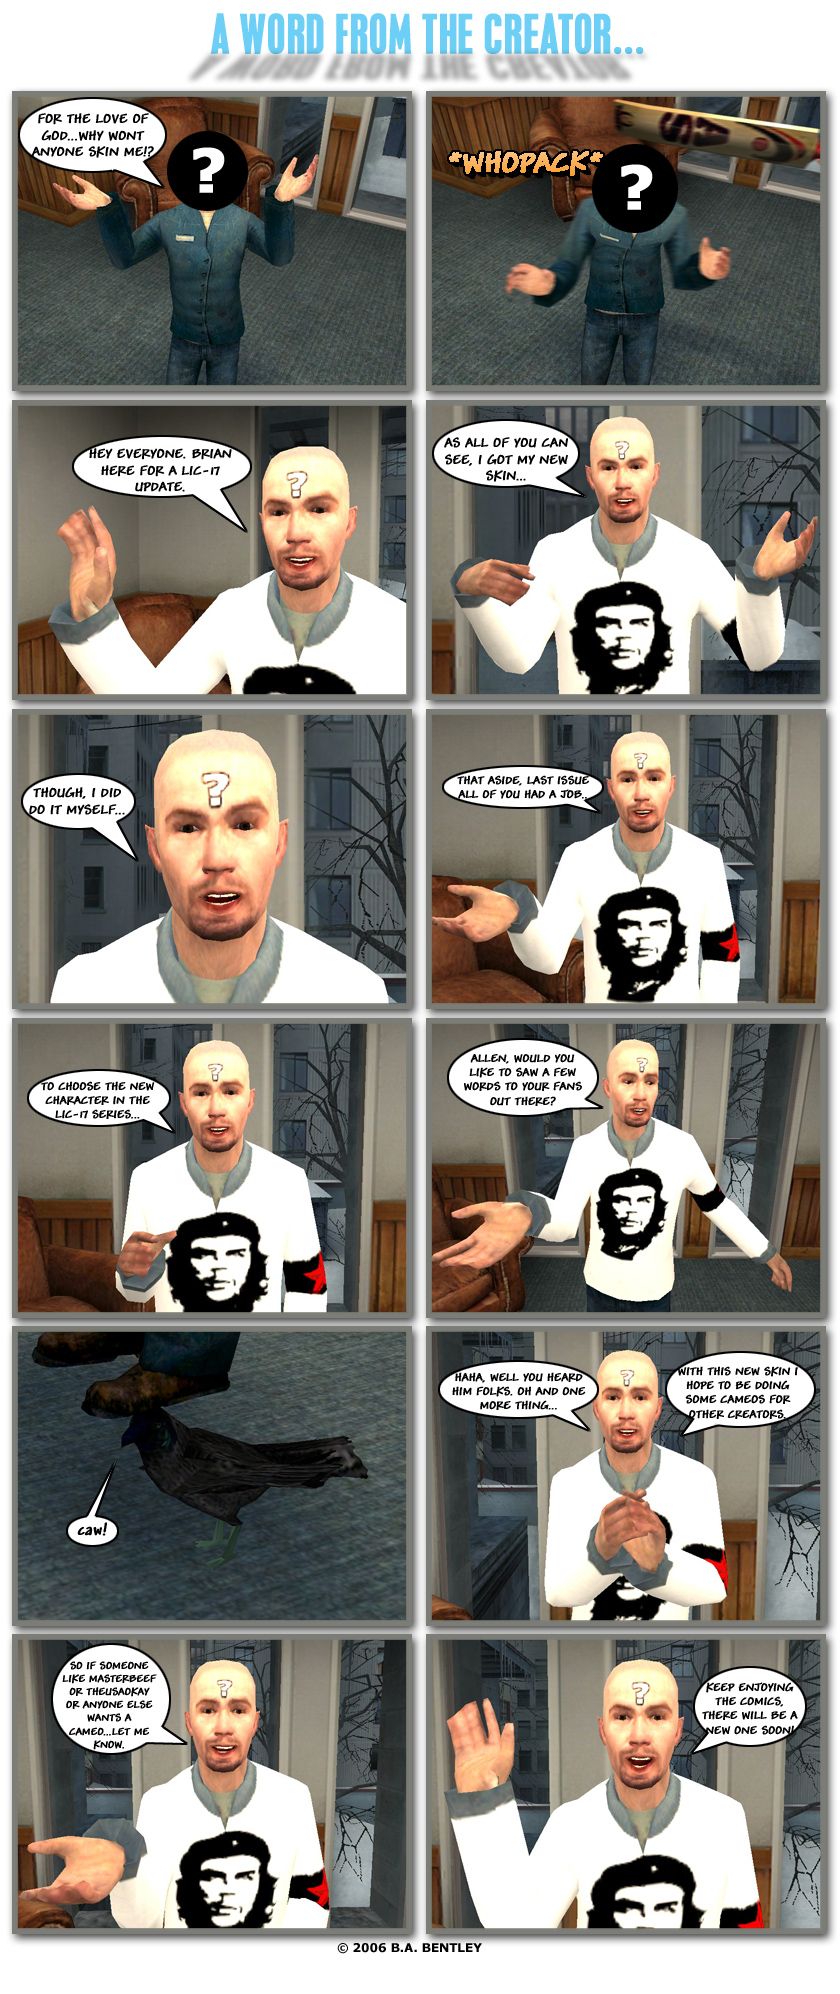 The faceless Brian from the previous comic is on his knees, asking for the love of God why won't anyone skin him. Suddenly, he is hit in the back of the head by a cricket bat. Brian, also known as Striker89, appears in his new skin and says hey everyone, Brian here for a Living in City 17 update. Striker89 notes that as all of you can see, he's got his new skin, though he did do it himself, but that aside, last issue all of you had a job, to choose the new character in the Living in City 17 series. Striker89 looks down and asks Allen if he would like to say a few words to his fans out there. Allen, a crow, caws in response. Striker89 laughs and says you heard him, folks, then adds one more thing, that with this new skin he hopes to be doing some cameos for other creators. He says if someone like MasterBeef or The USA Okay or anyone else wants a cameo, to let him know, then waves and says to keep enjoying the comics, there will be a new one soon.